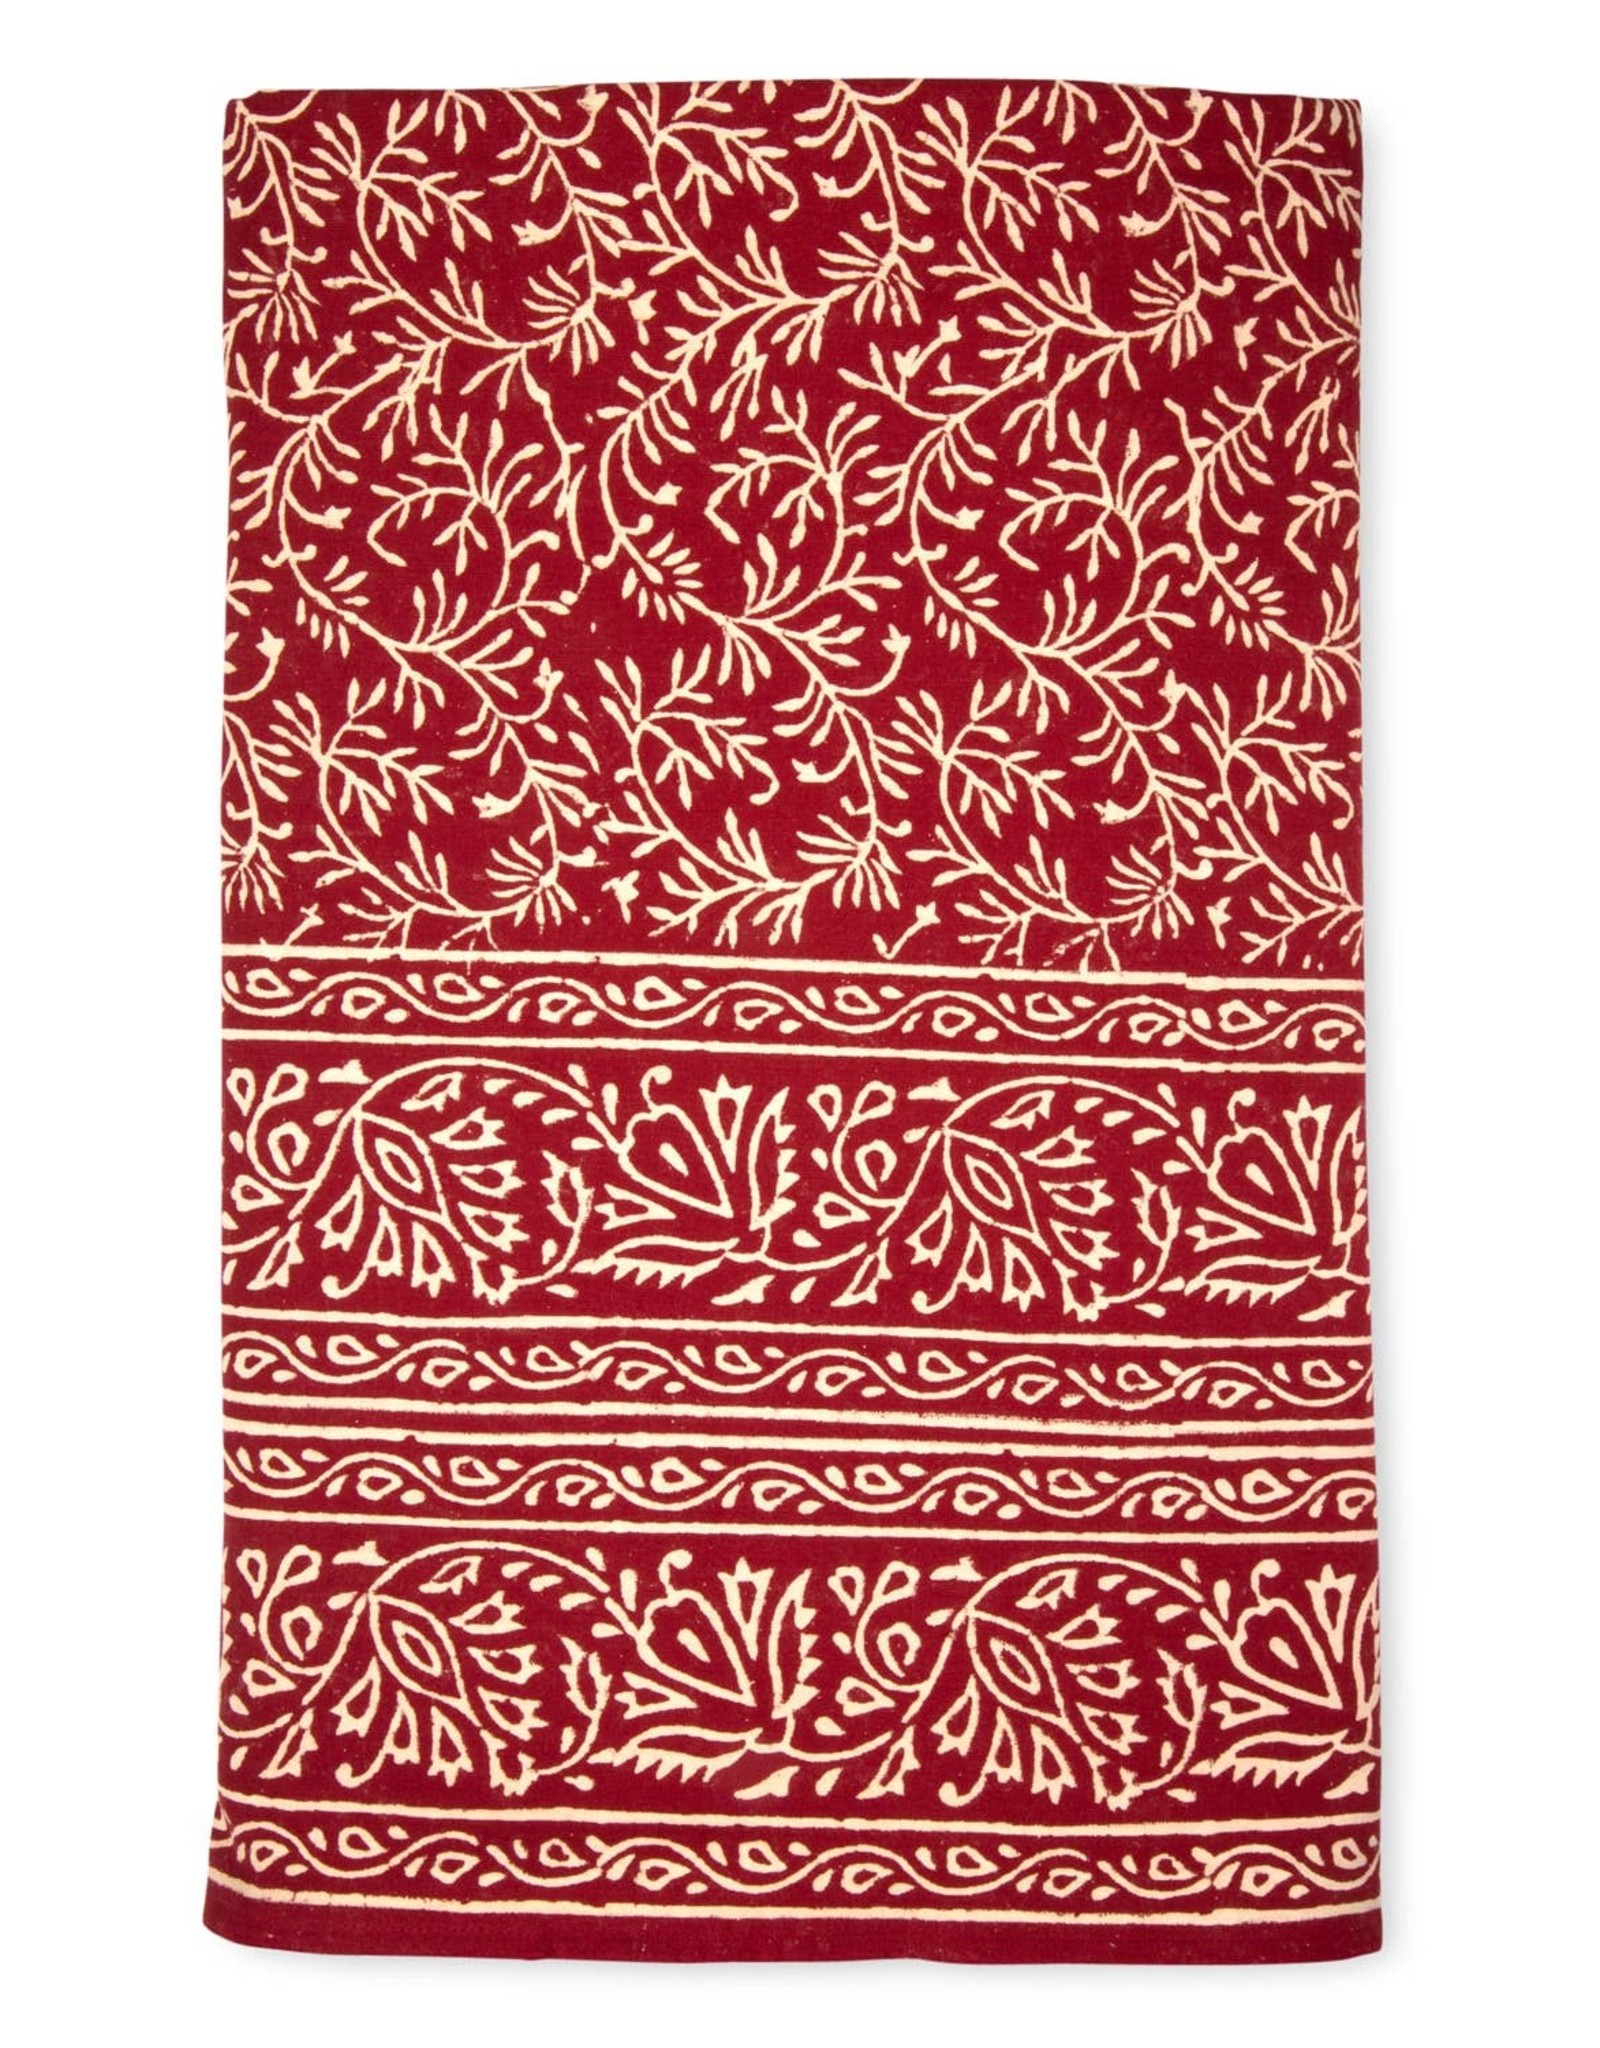 Ten Thousand Villages Red Vines Tablecloth 70x120in